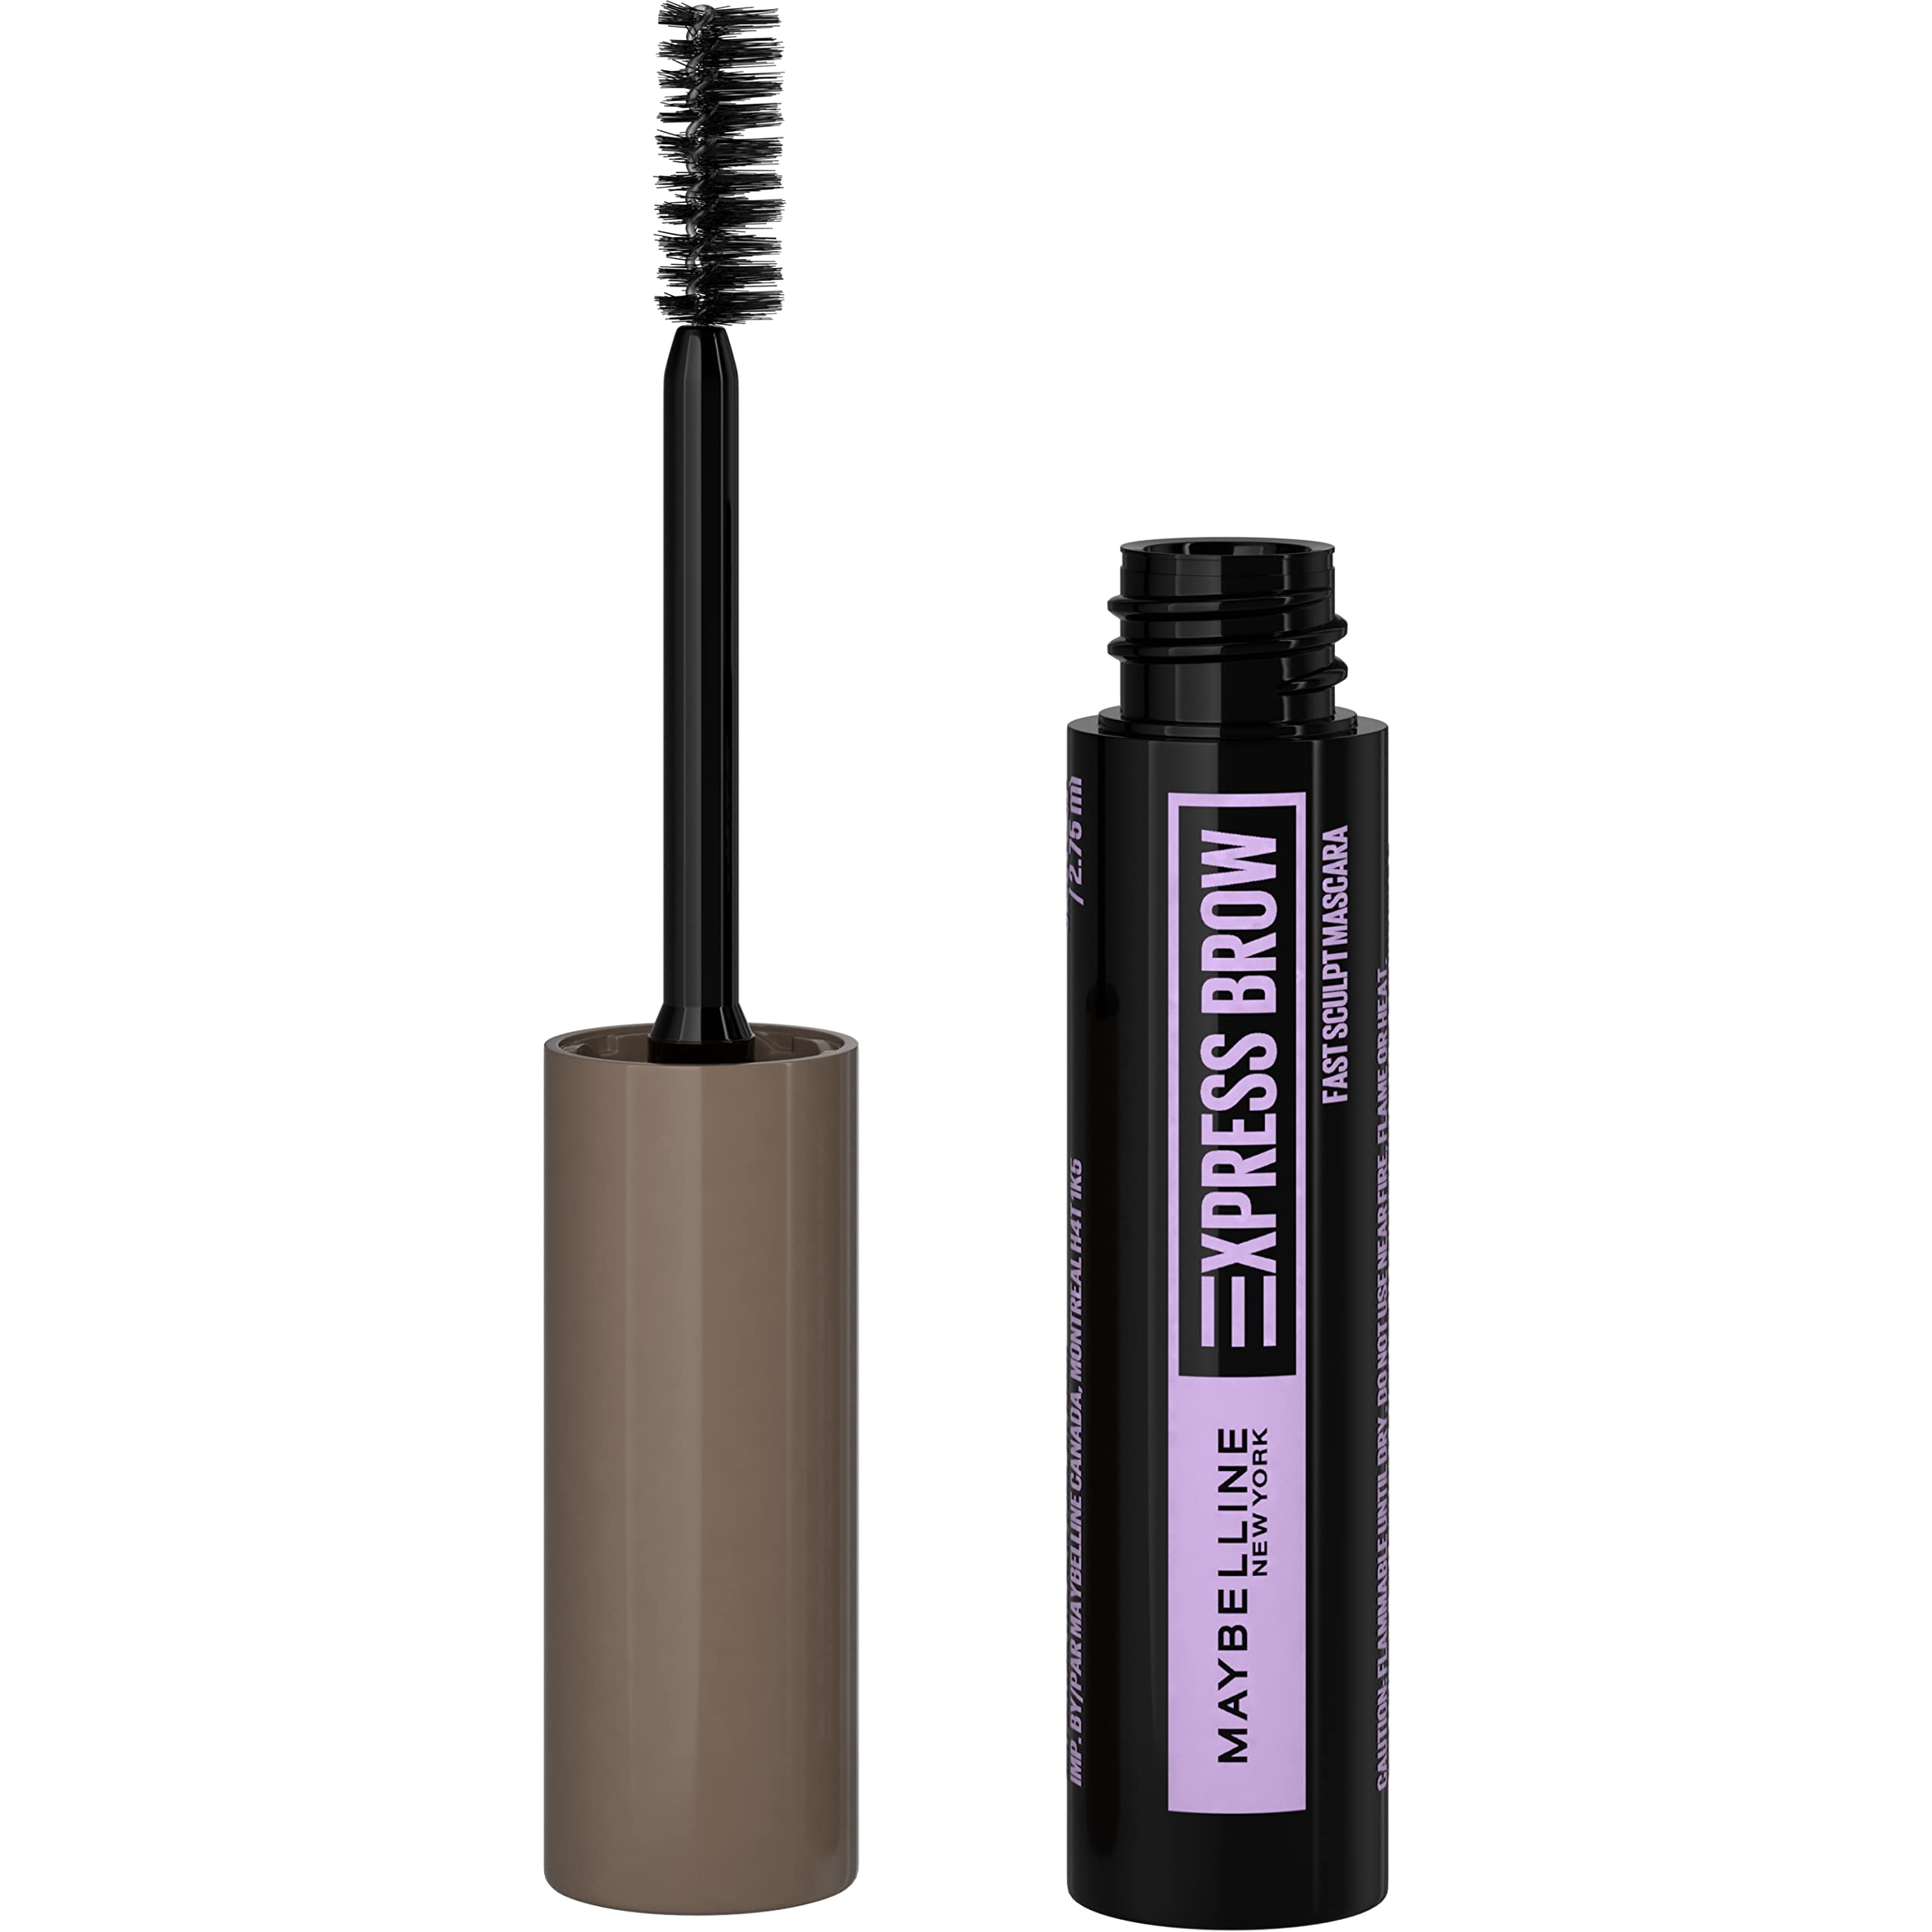 Maybelline New York Brow Fast Sculpt, Shapes Eyebrows, Eyebrow Mascara Makeup, Soft Brown, 0.09 Fl. Oz.